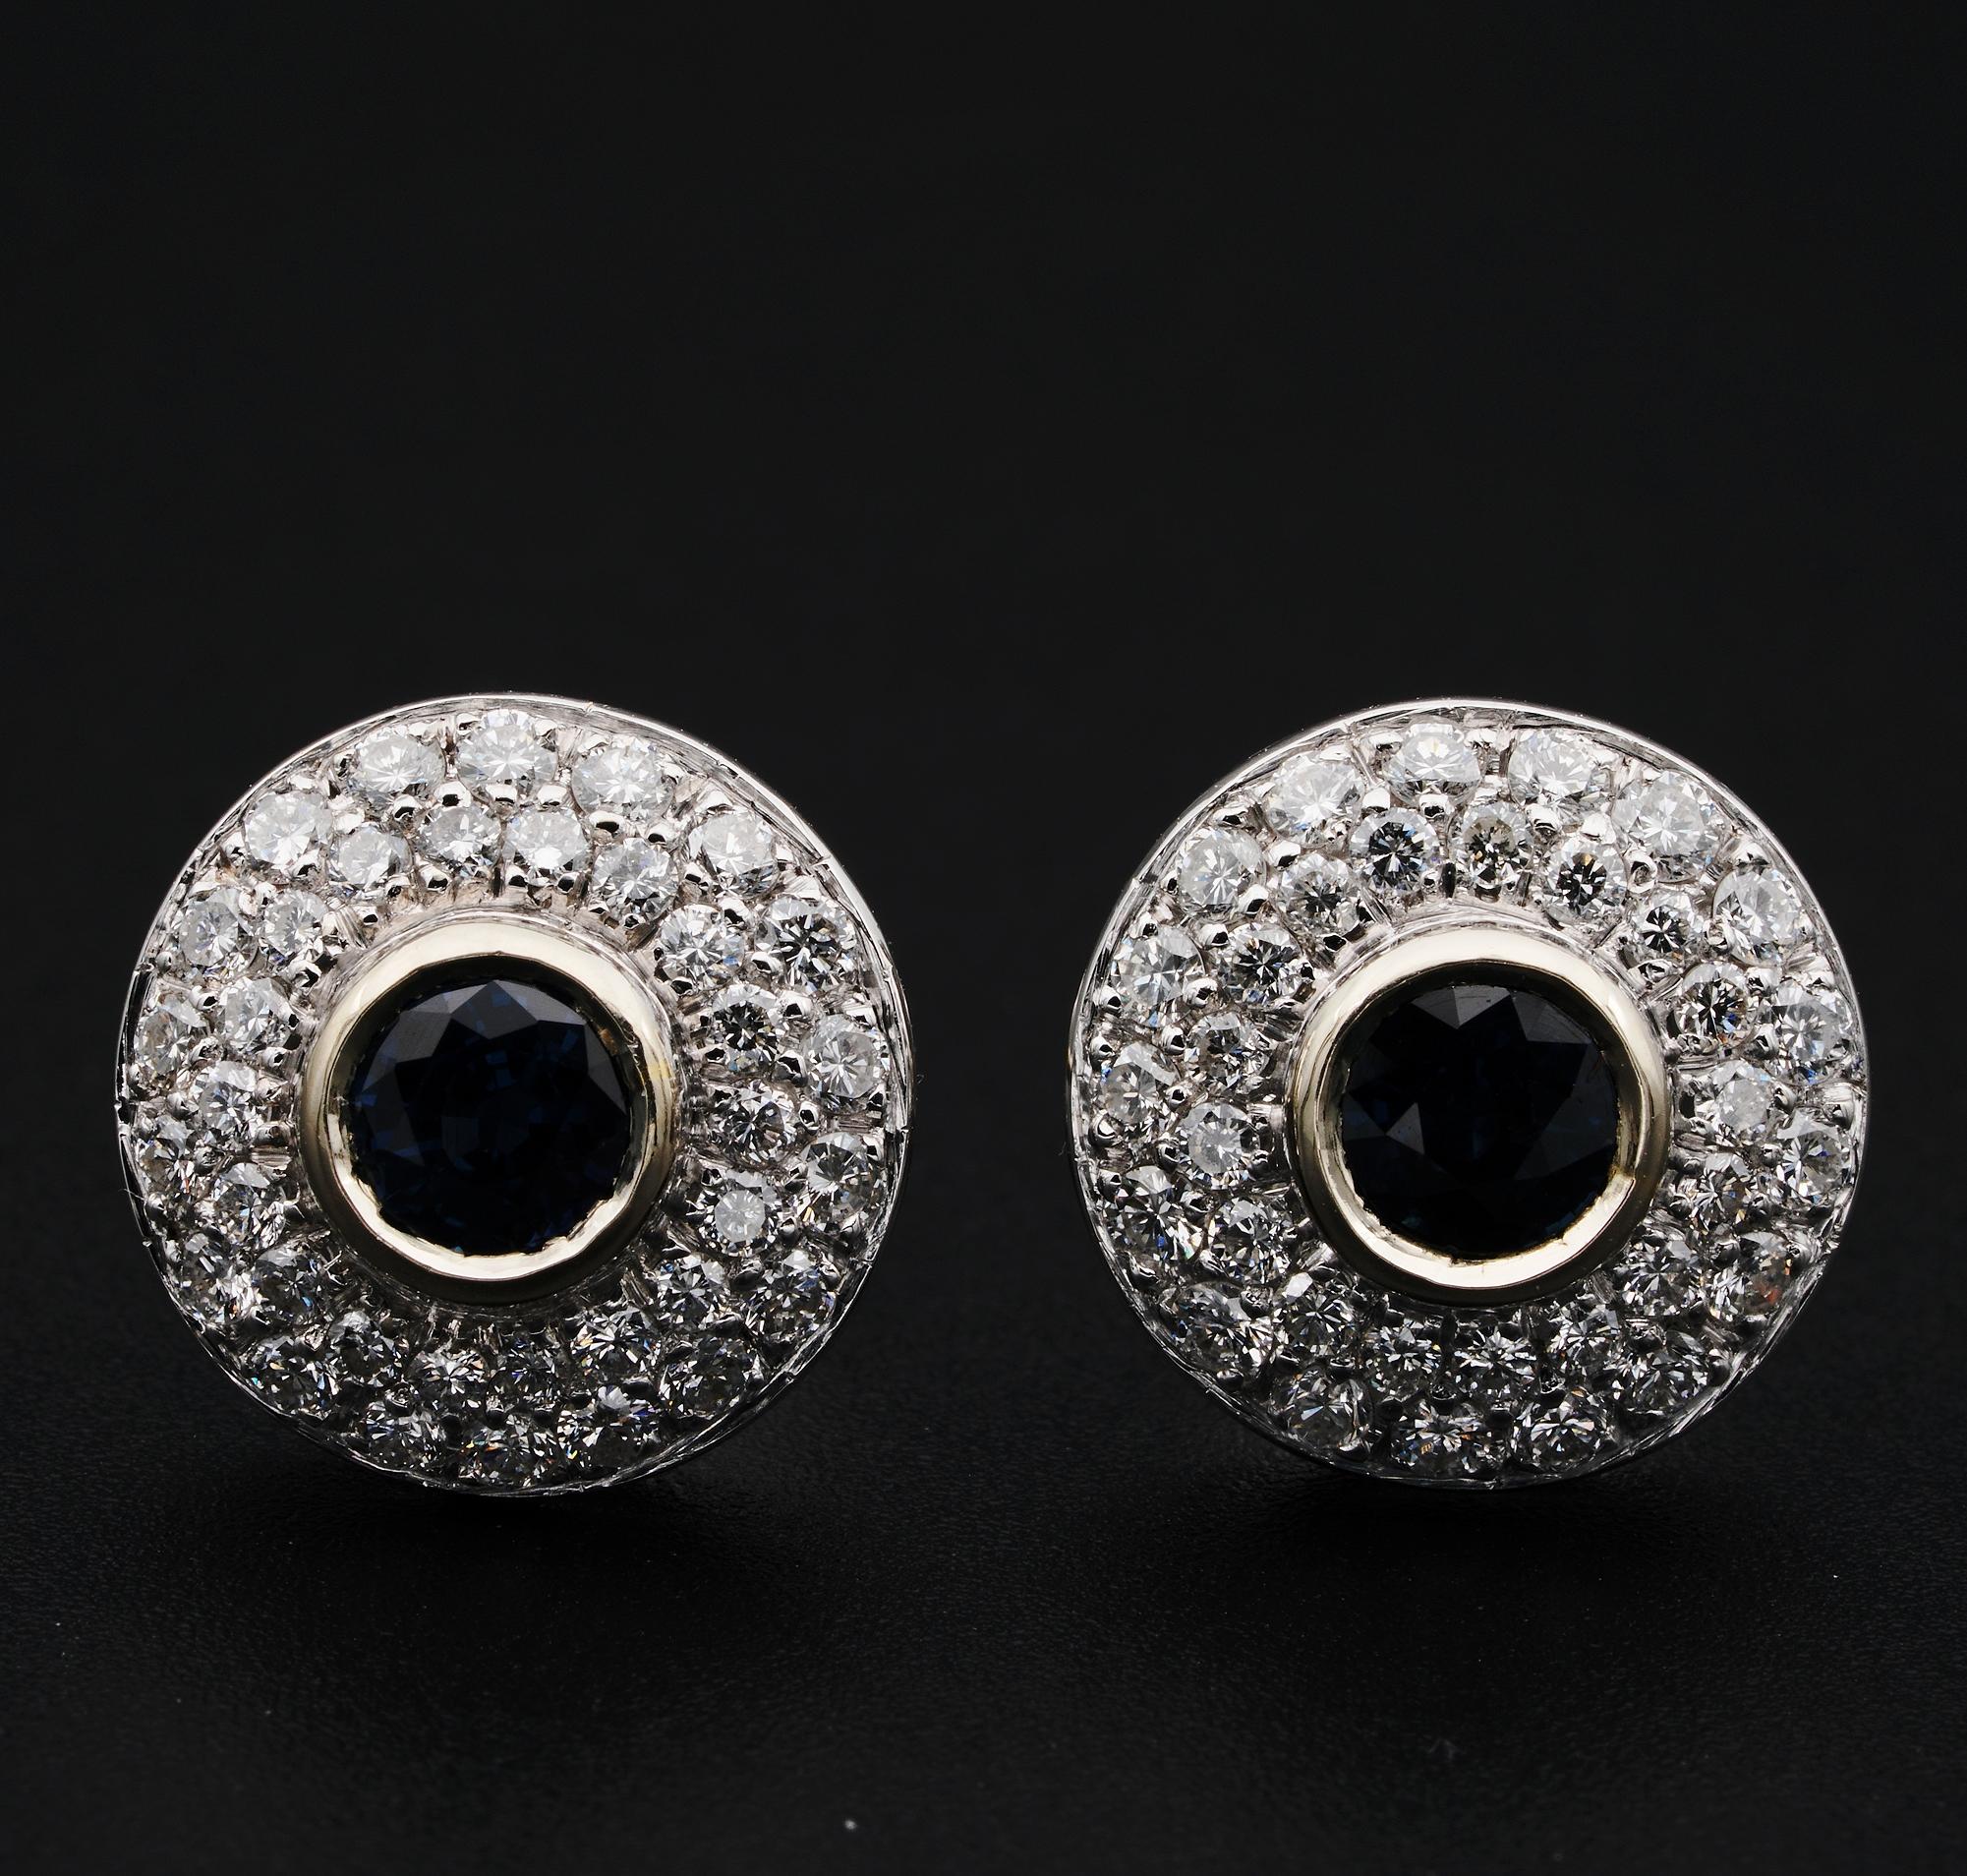 Beautiful Every Day

Charming vintage stud earring, beautiful designed as a target with centre point made of Natural no heat – untreated - Sapphire and rich surround of Diamonds
Mid century – hand crafted as unique pair of solid 18 KT white